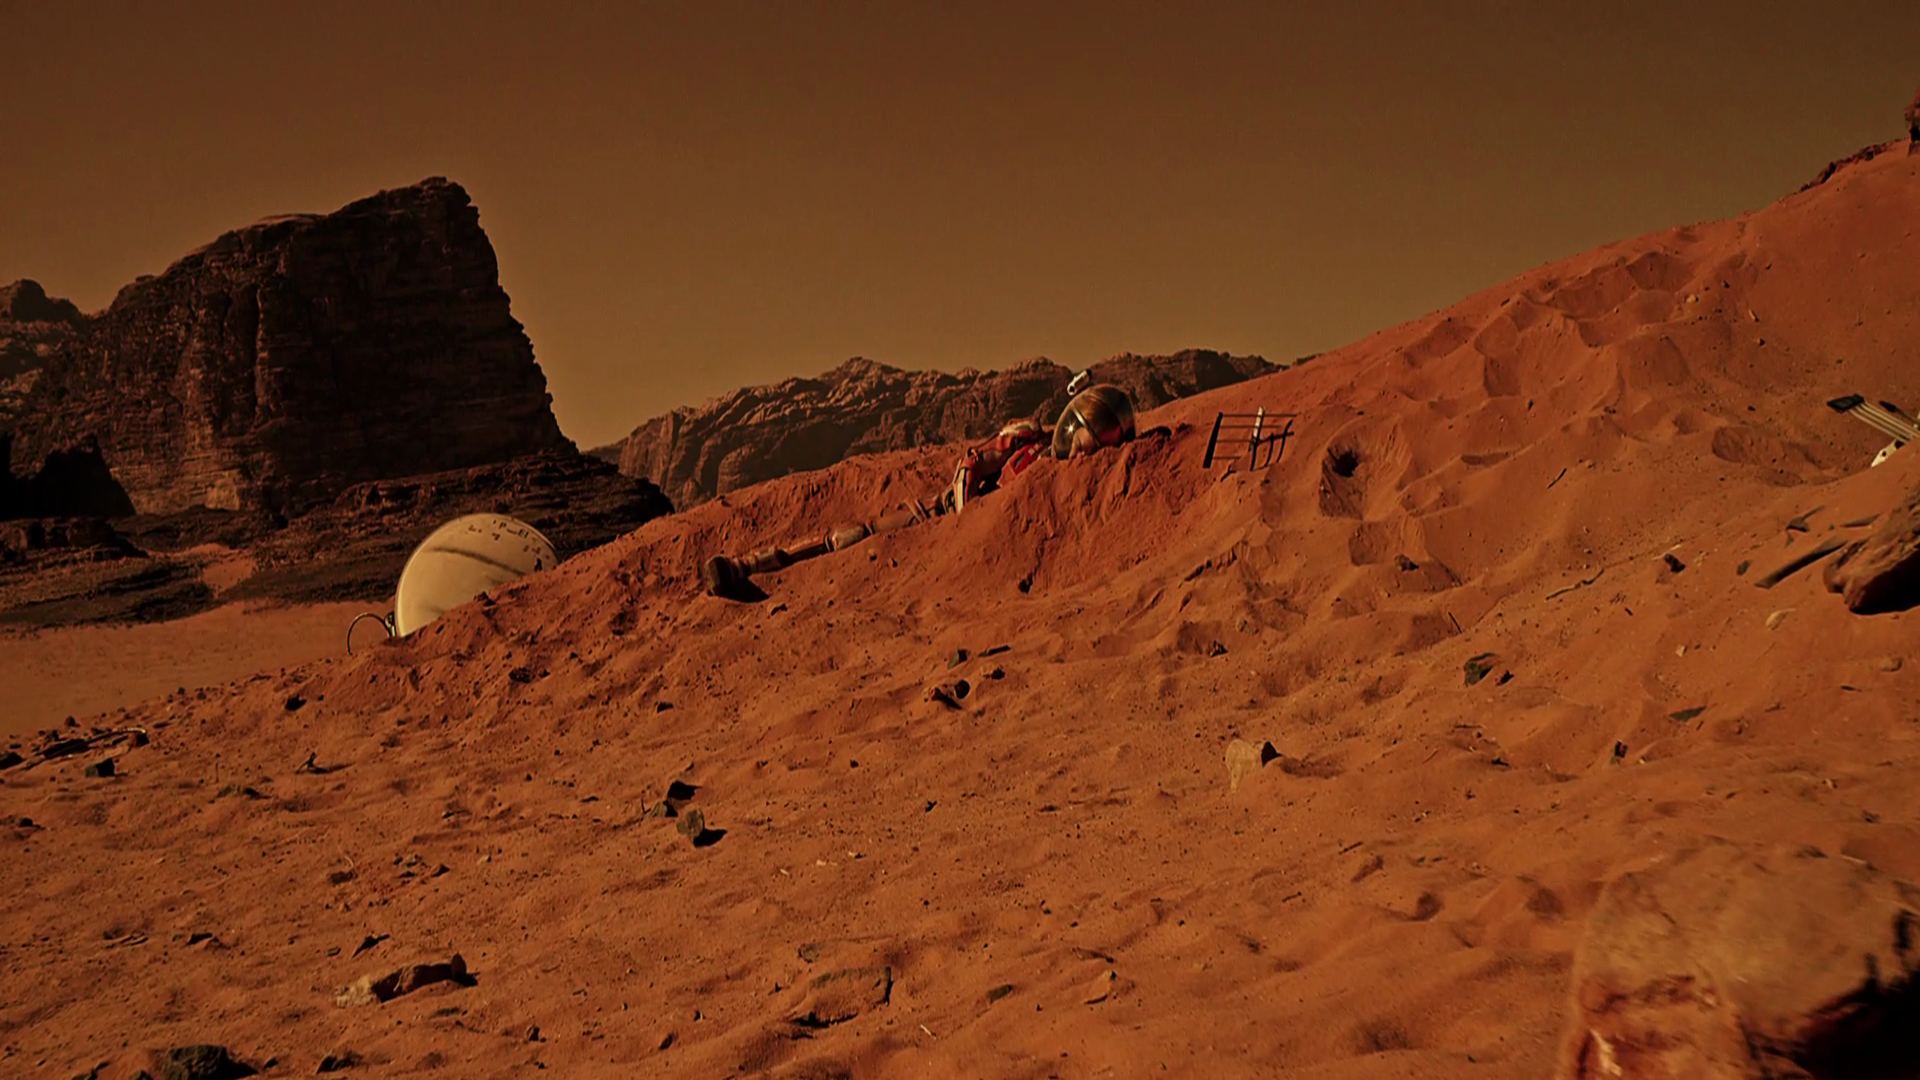 Planet Sand The Martian 1920x1080